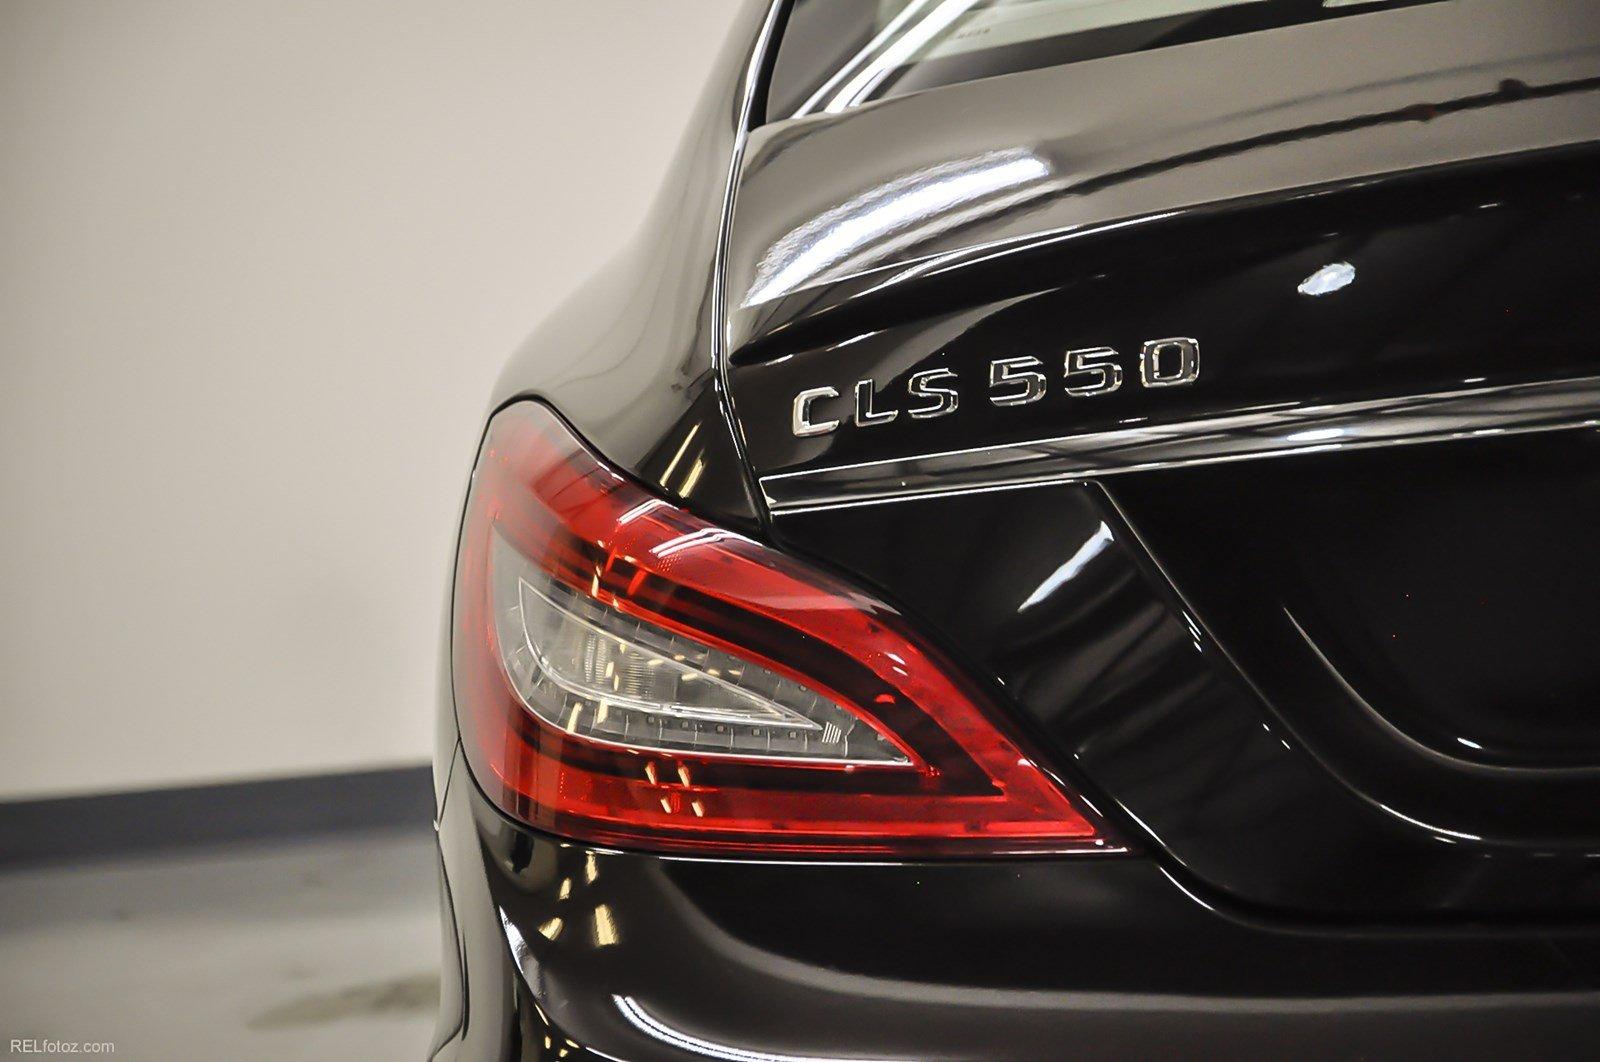 Used 2012 Mercedes-Benz CLS-Class CLS 550 for sale Sold at Gravity Autos Marietta in Marietta GA 30060 6